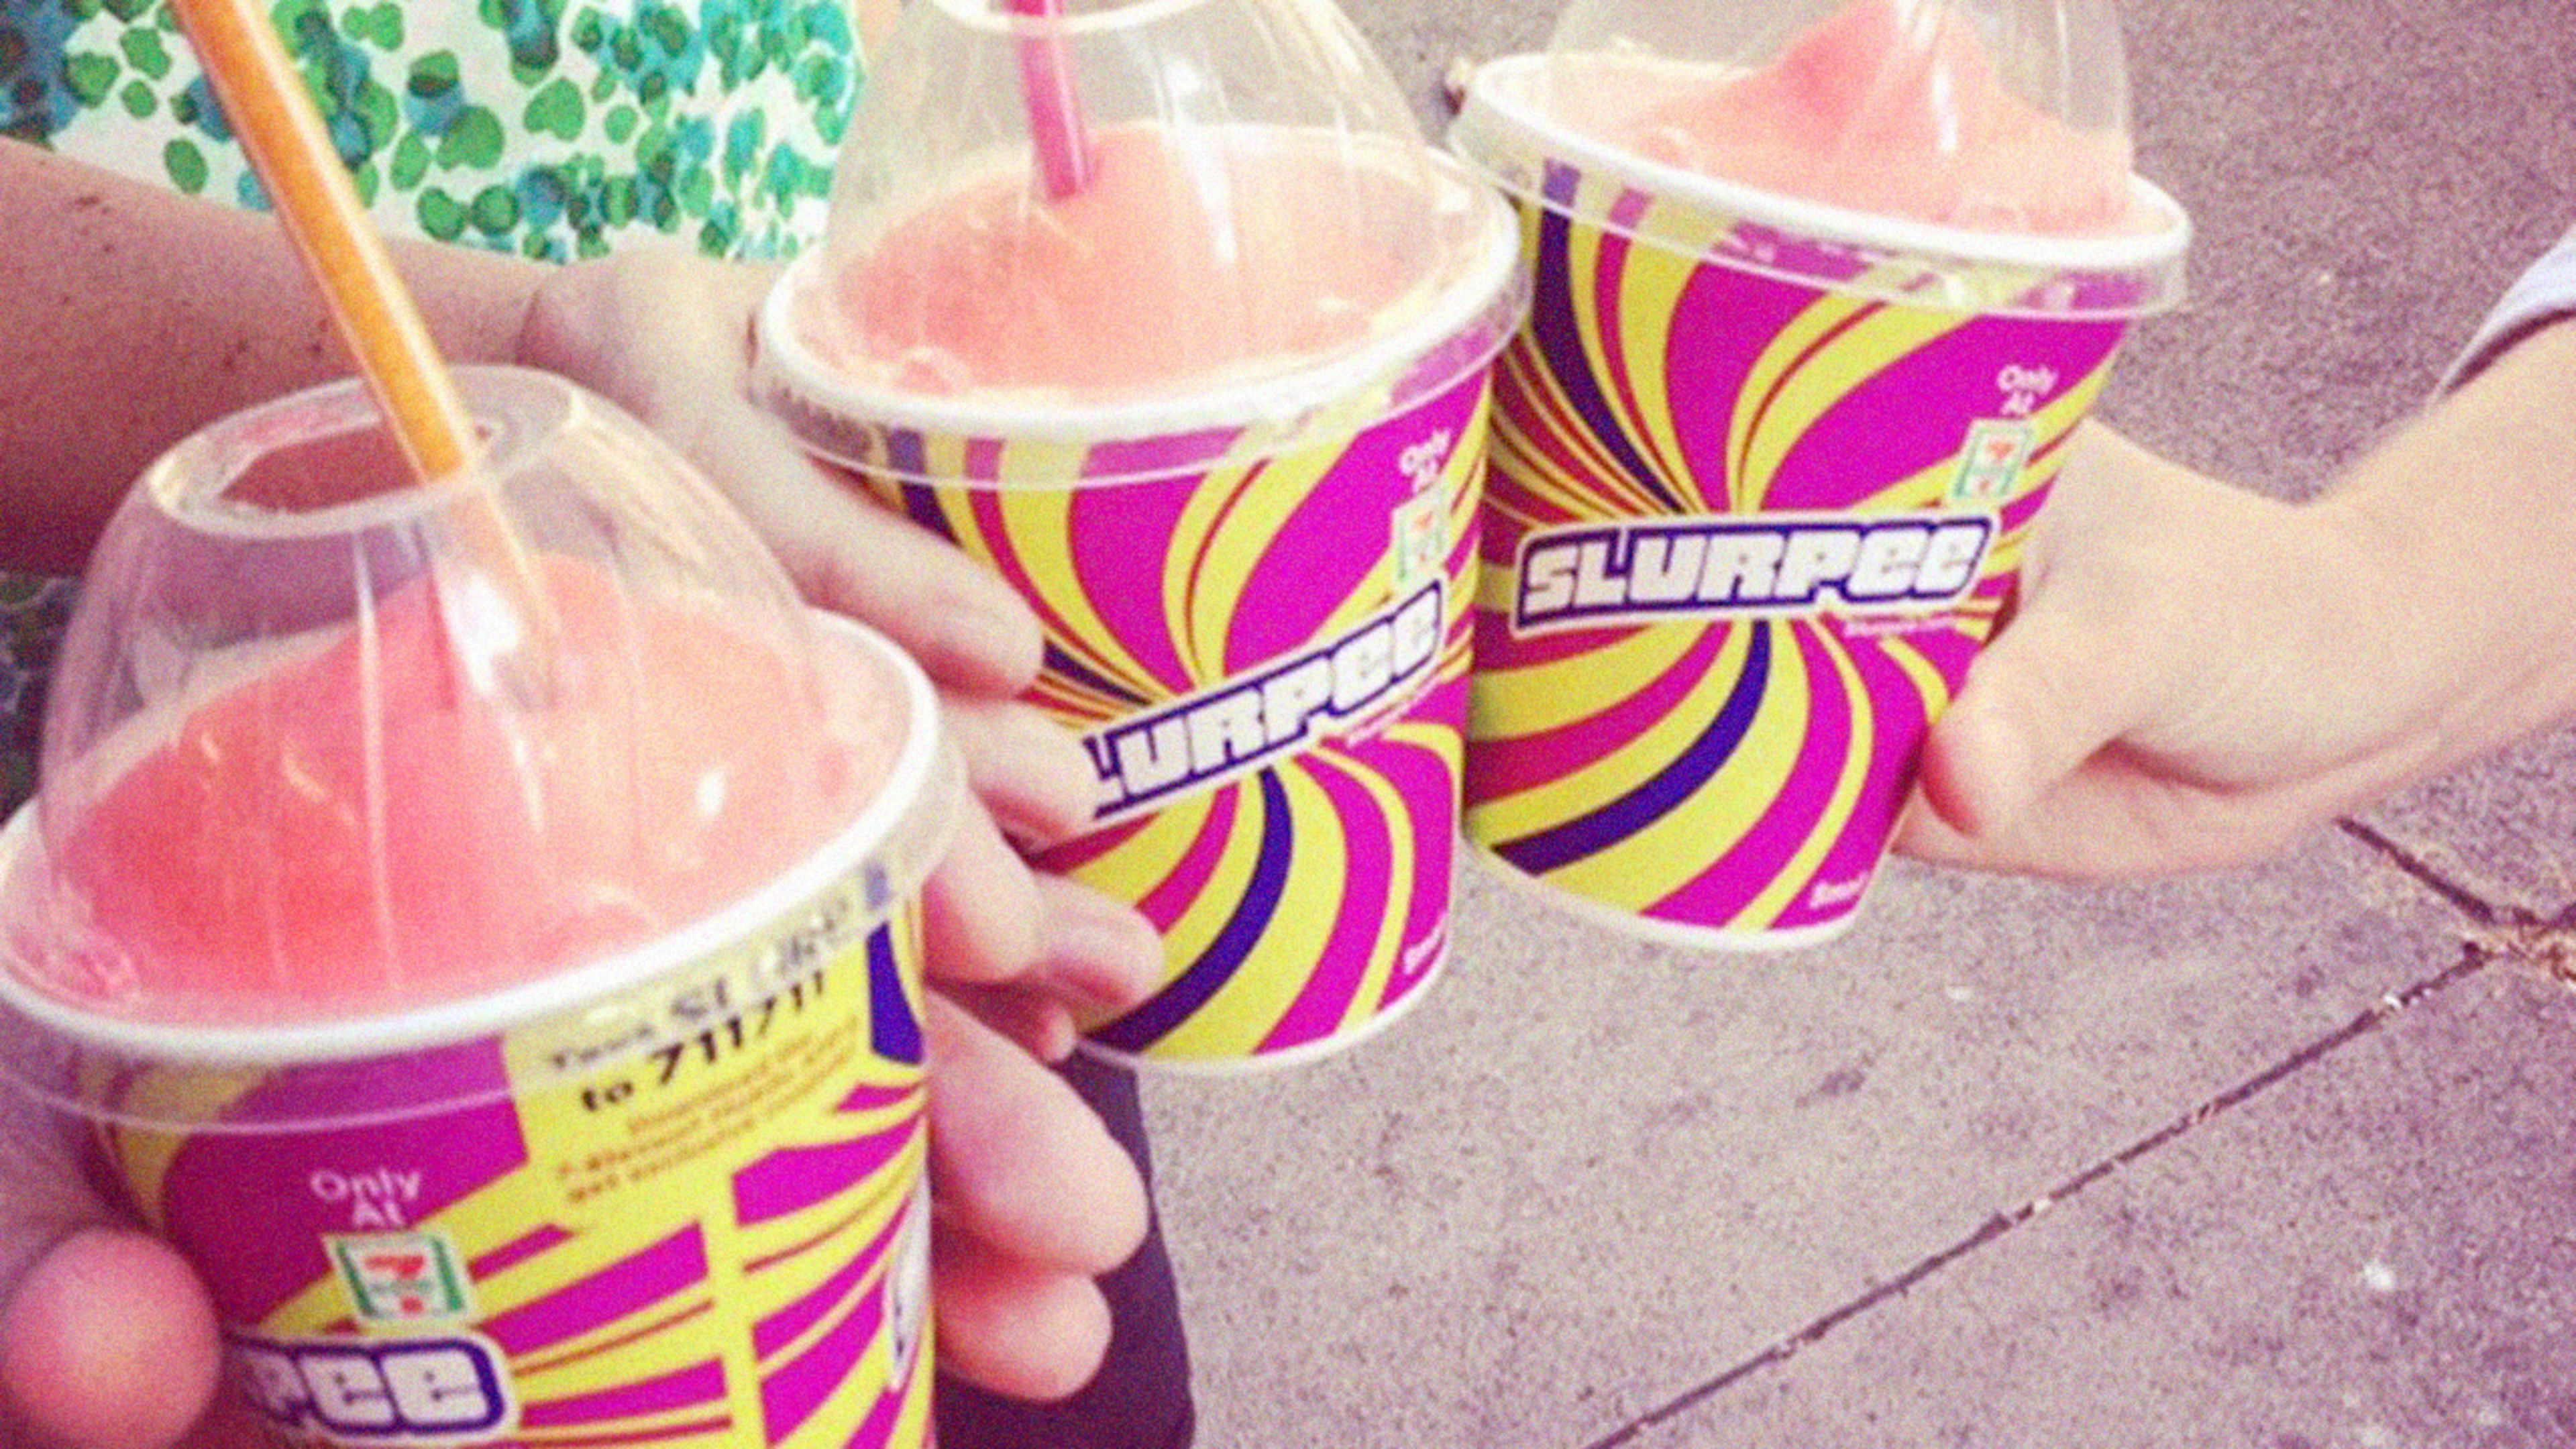 7-Eleven is handing out free Slurpees today–here’s how to get one